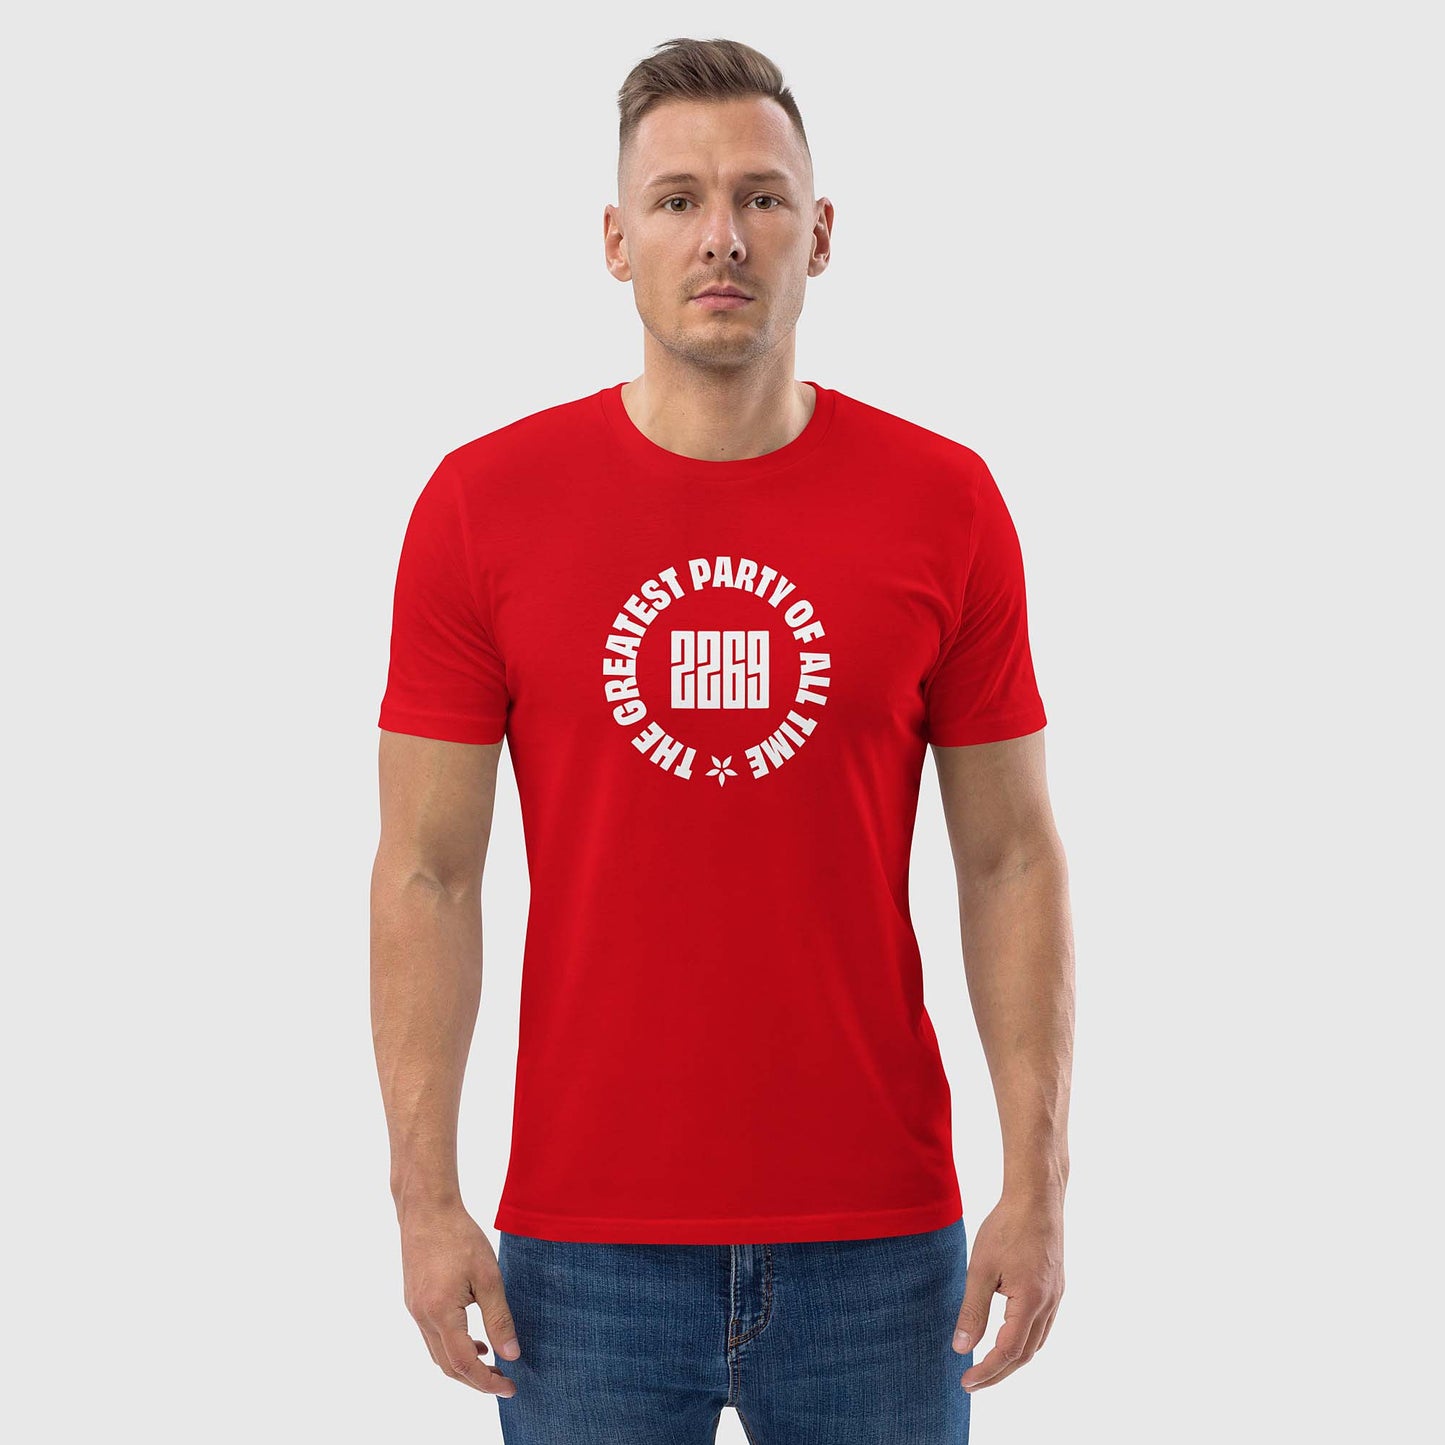 Men's red organic cotton t-shirt with English 2269 party circle